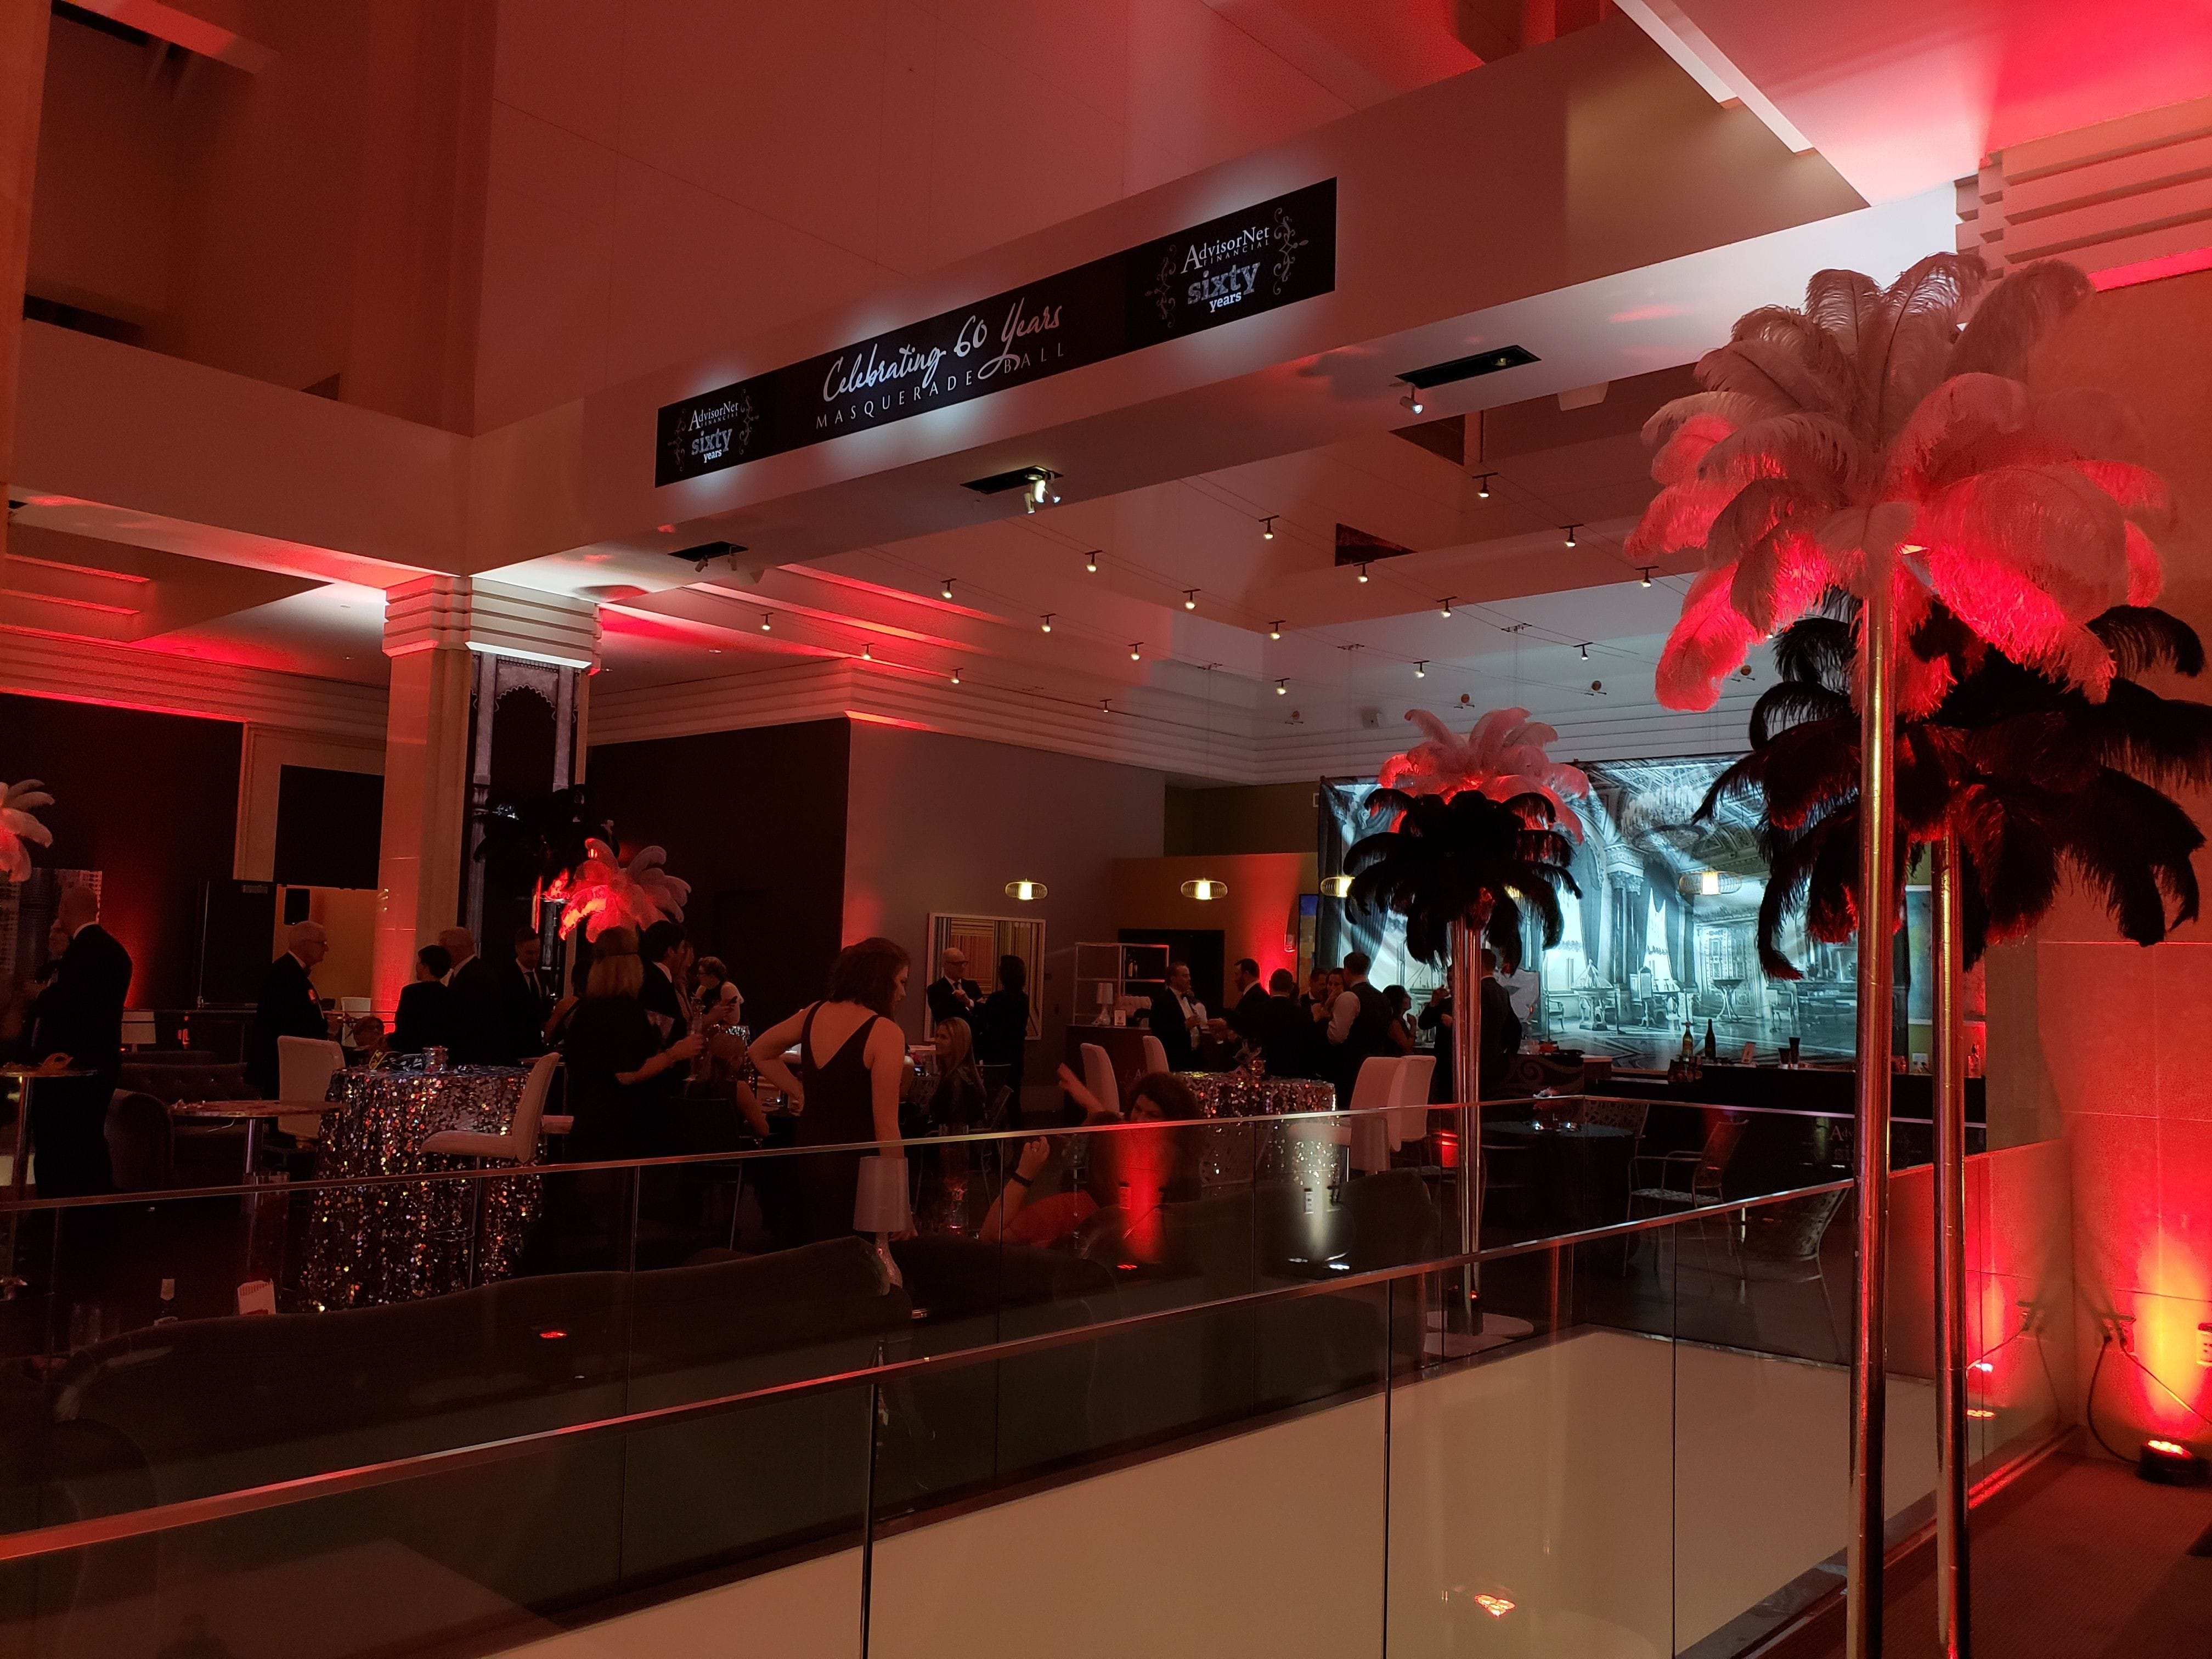 Radisson Blu, Mpls. Lighting for a masquerade ball. Red up lighting, pin spots,backdrop lighting. Decor by Event Lab.